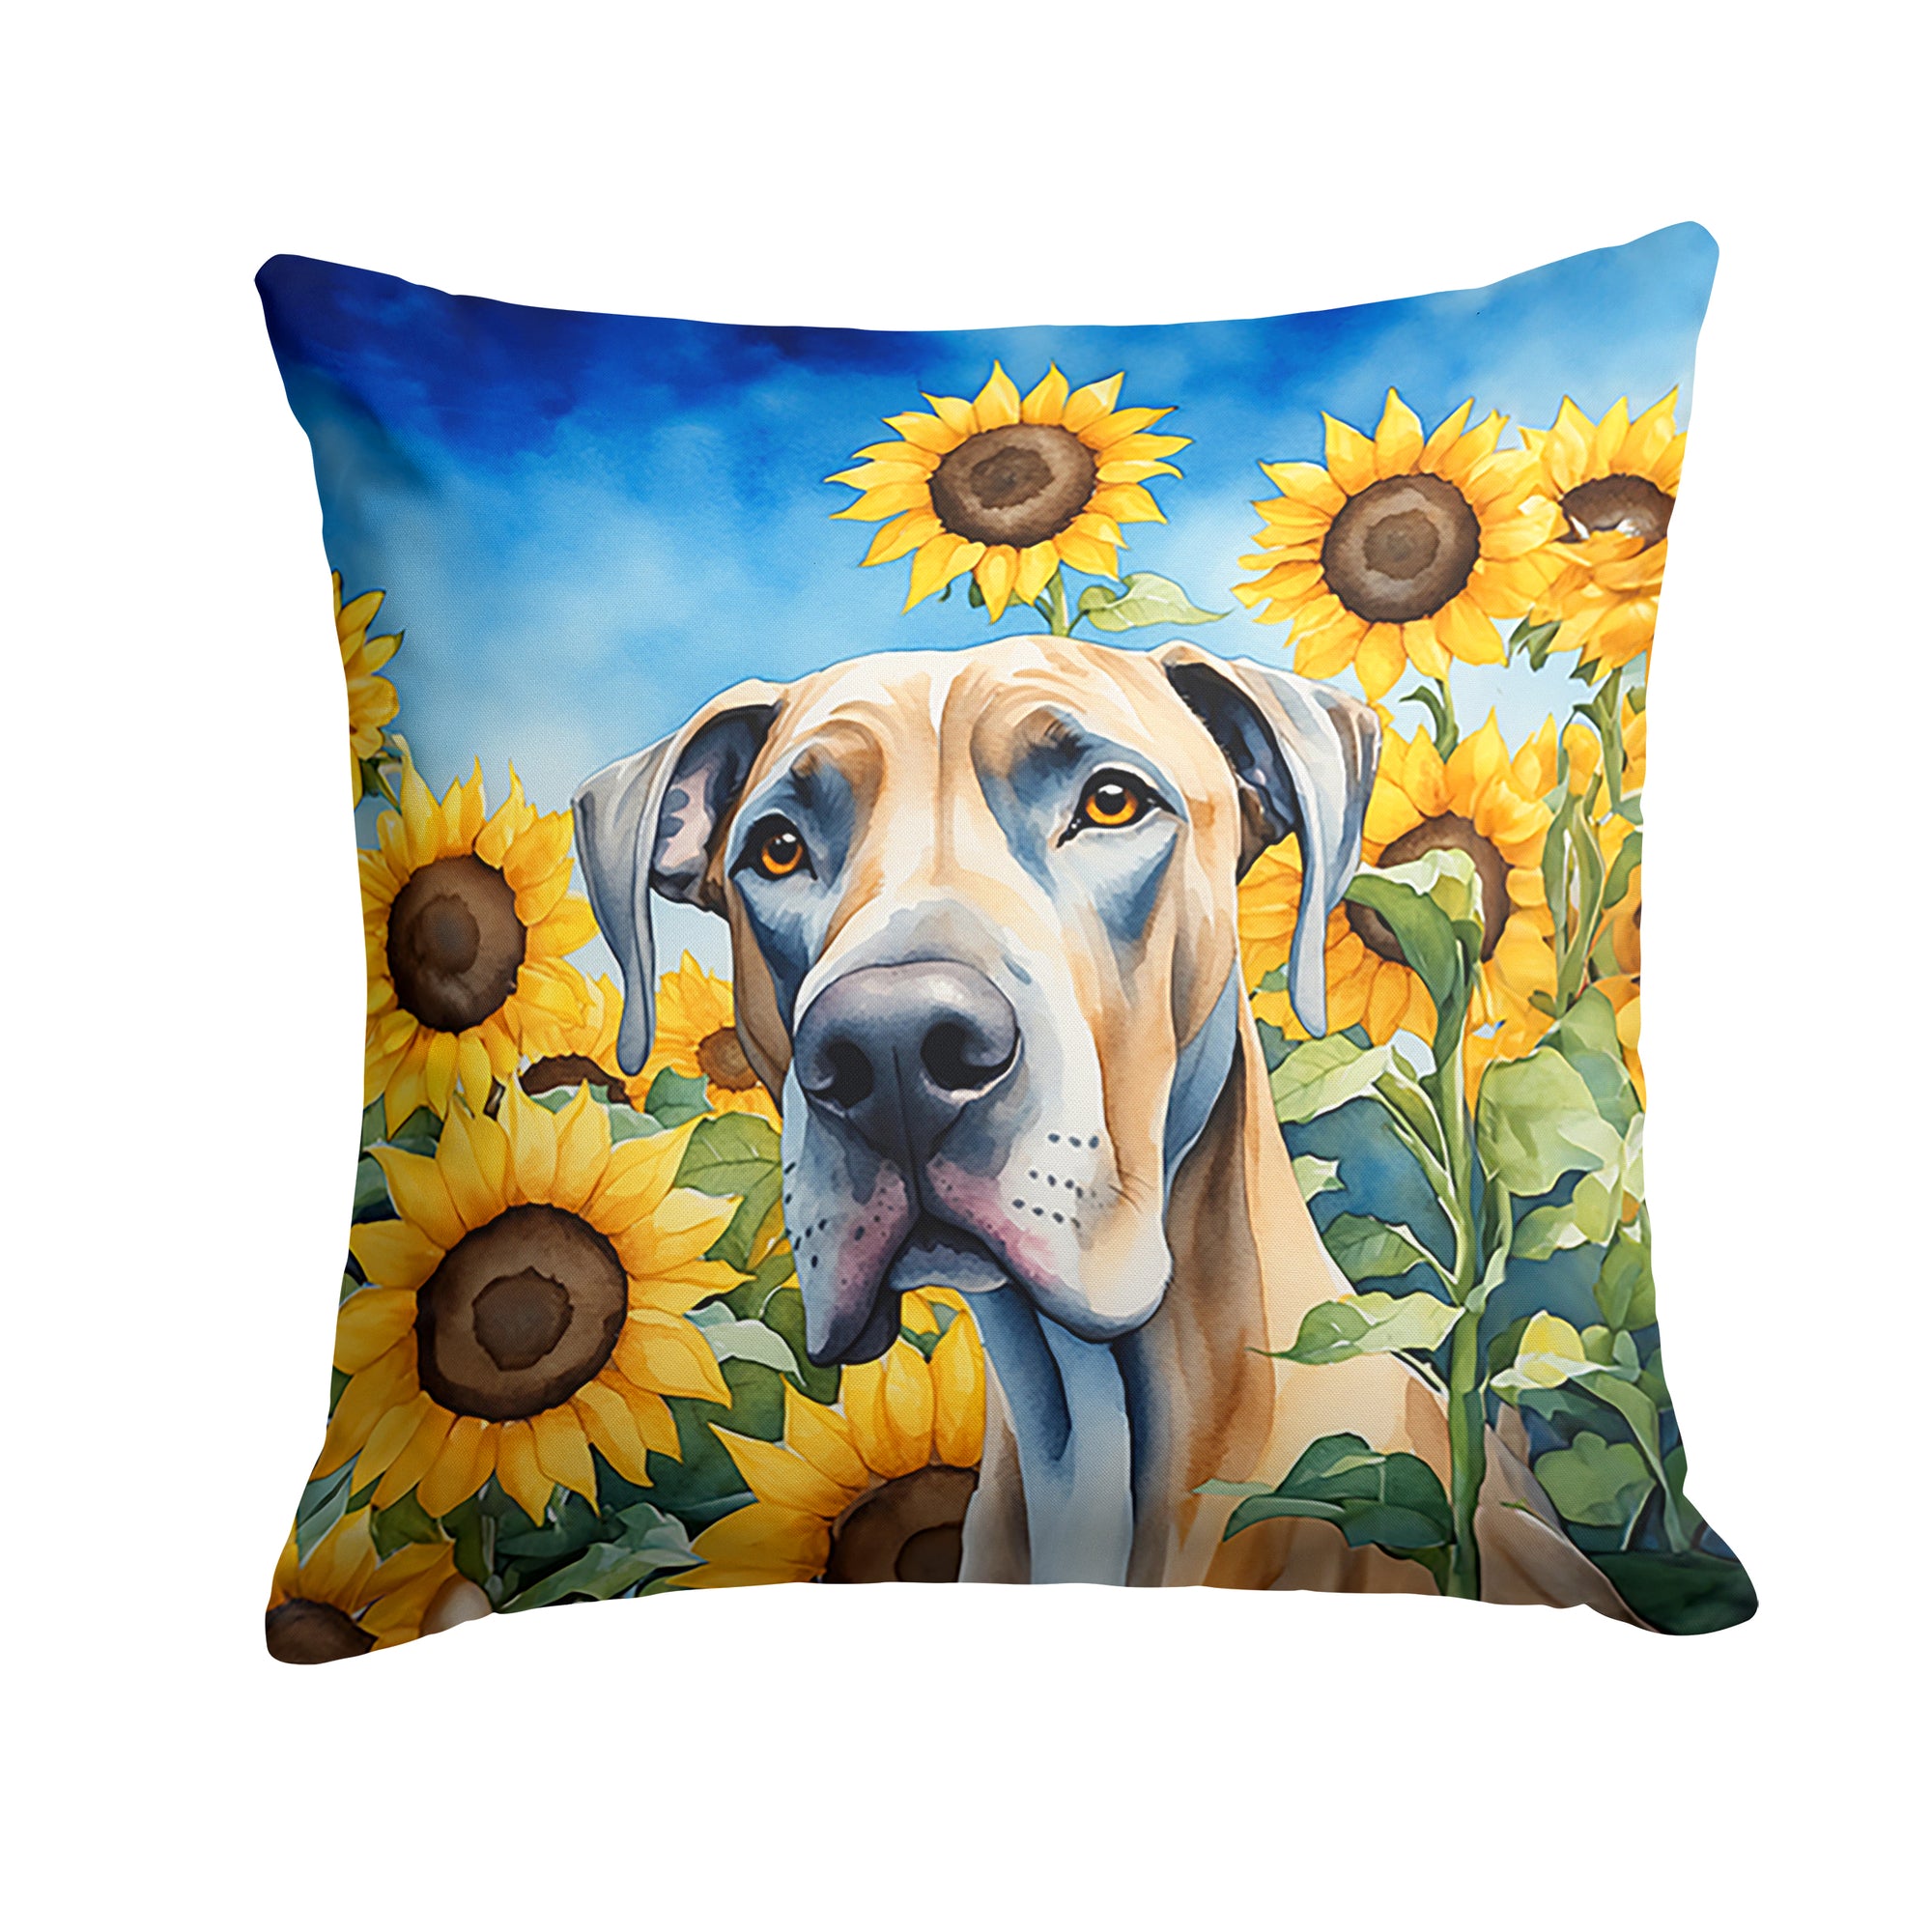 Buy this Great Dane in Sunflowers Throw Pillow